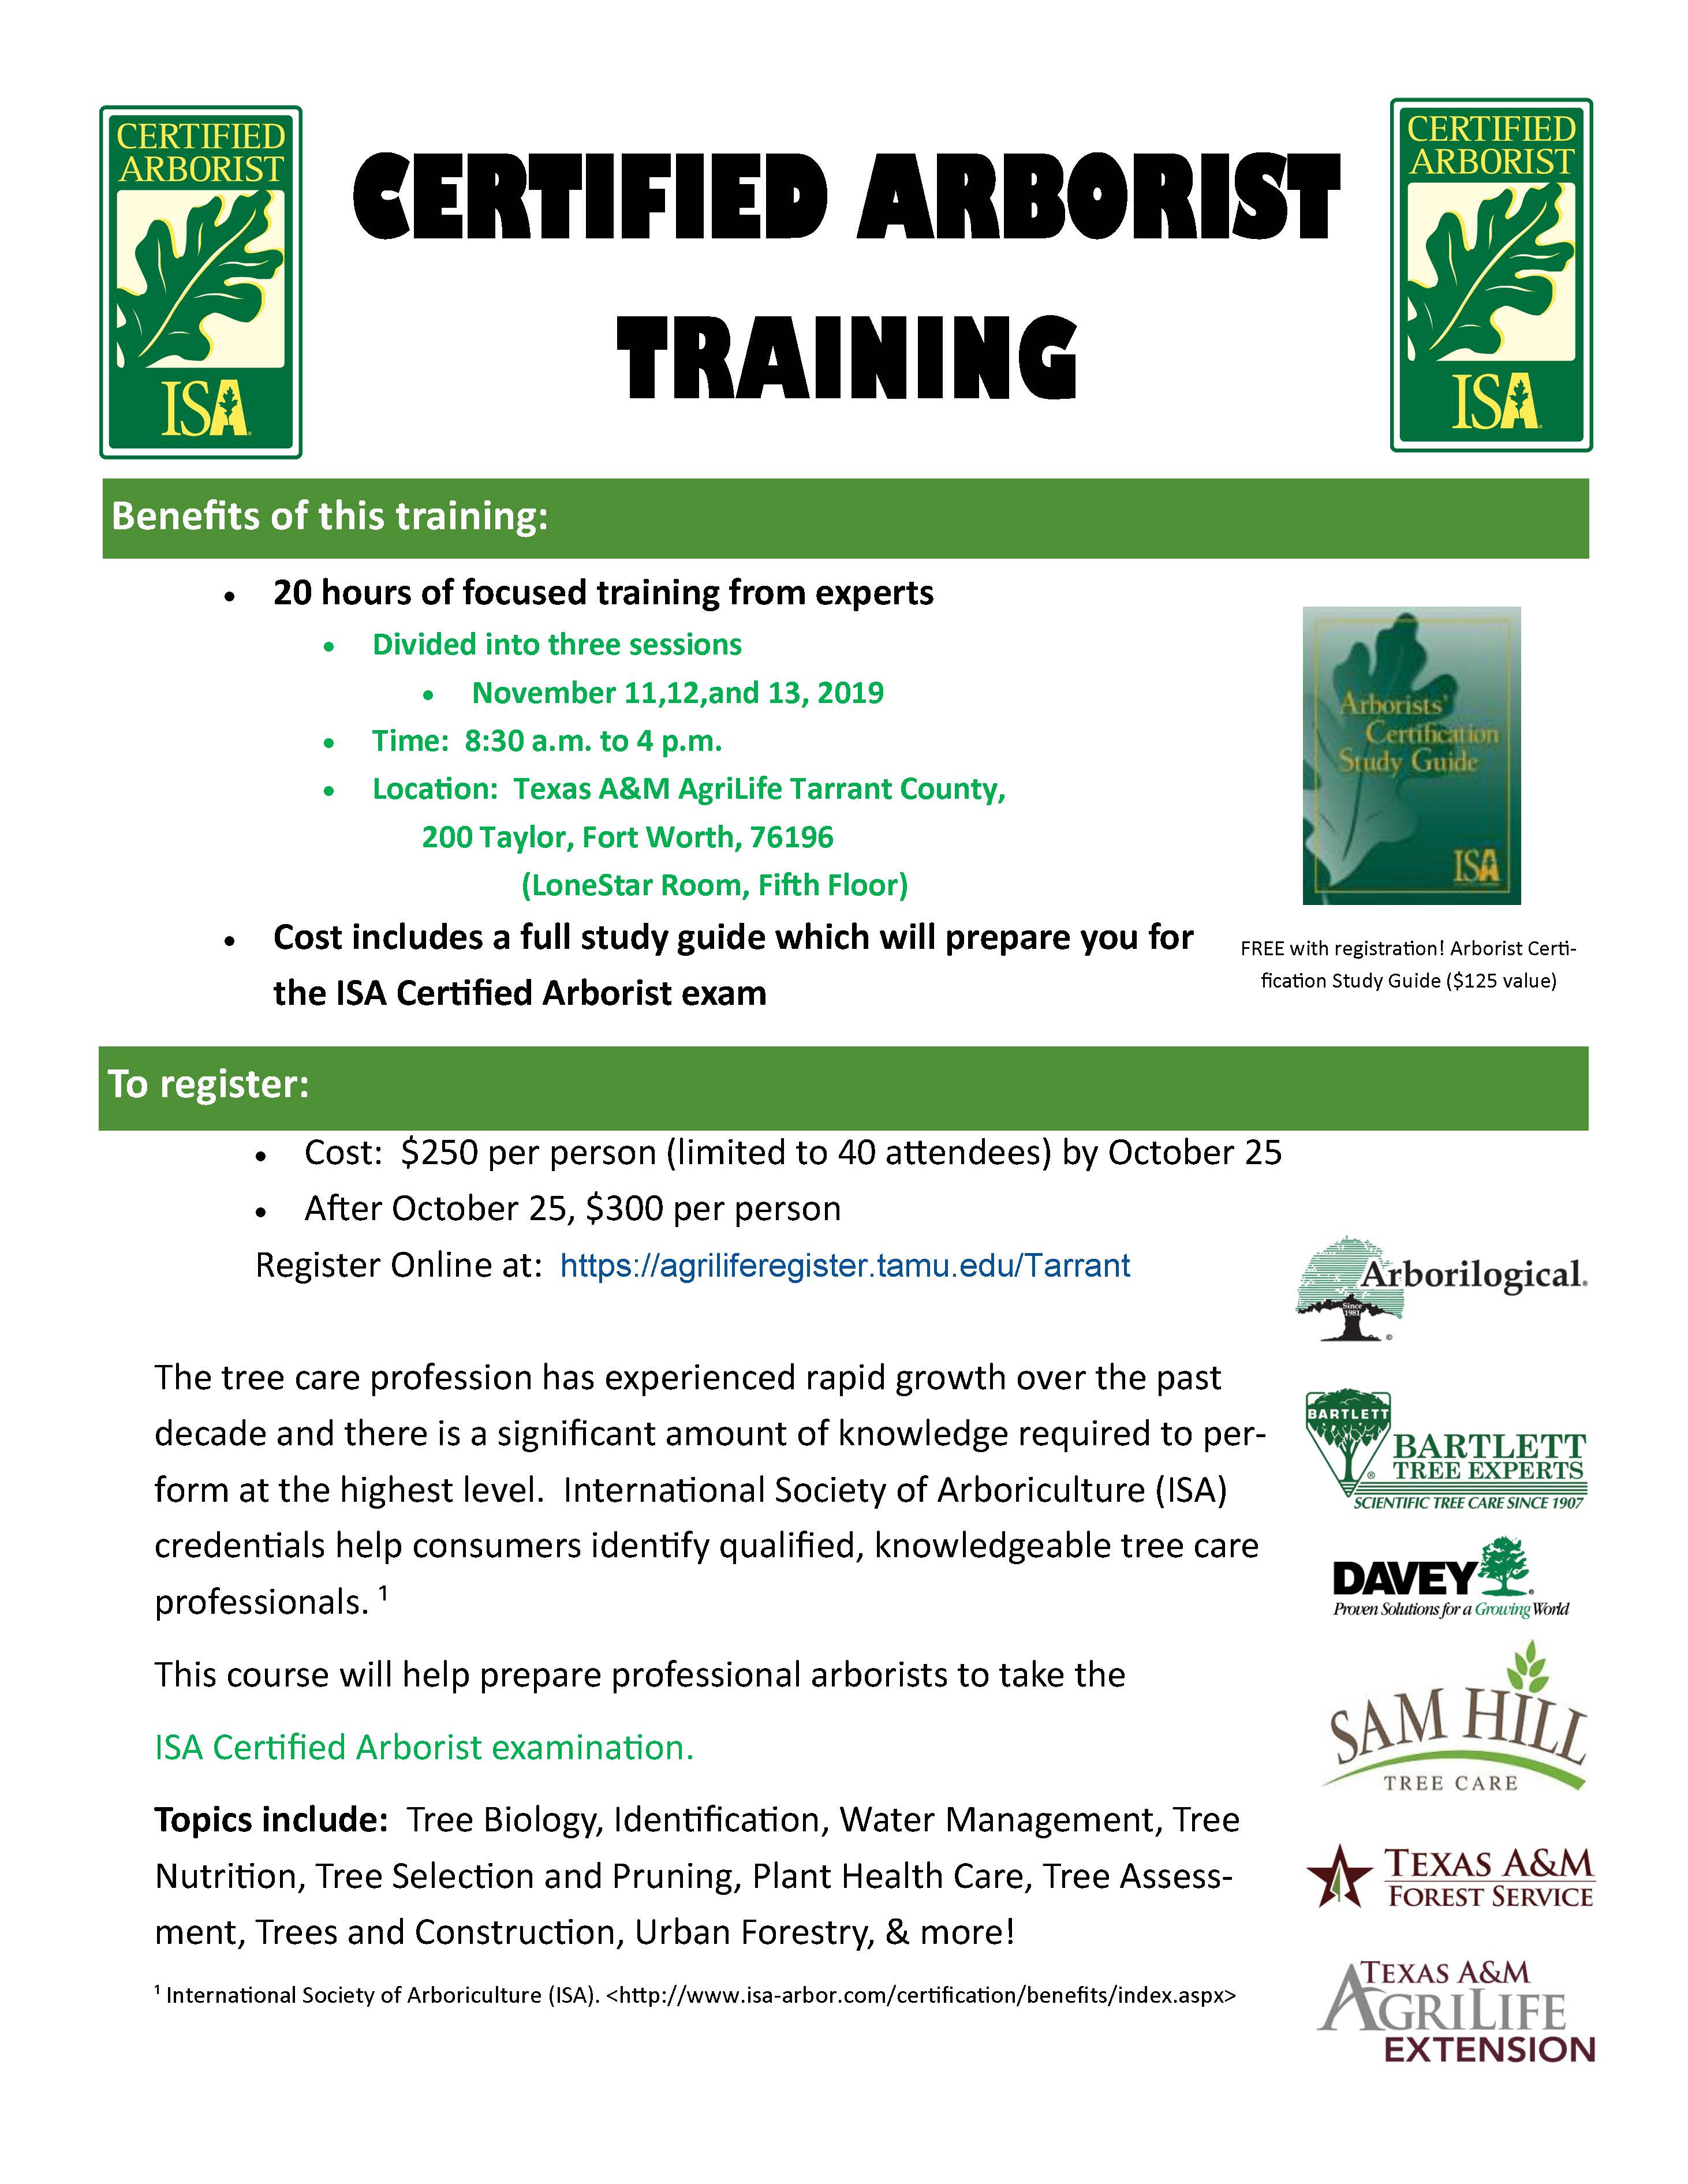 how to become a certified arborist in texas